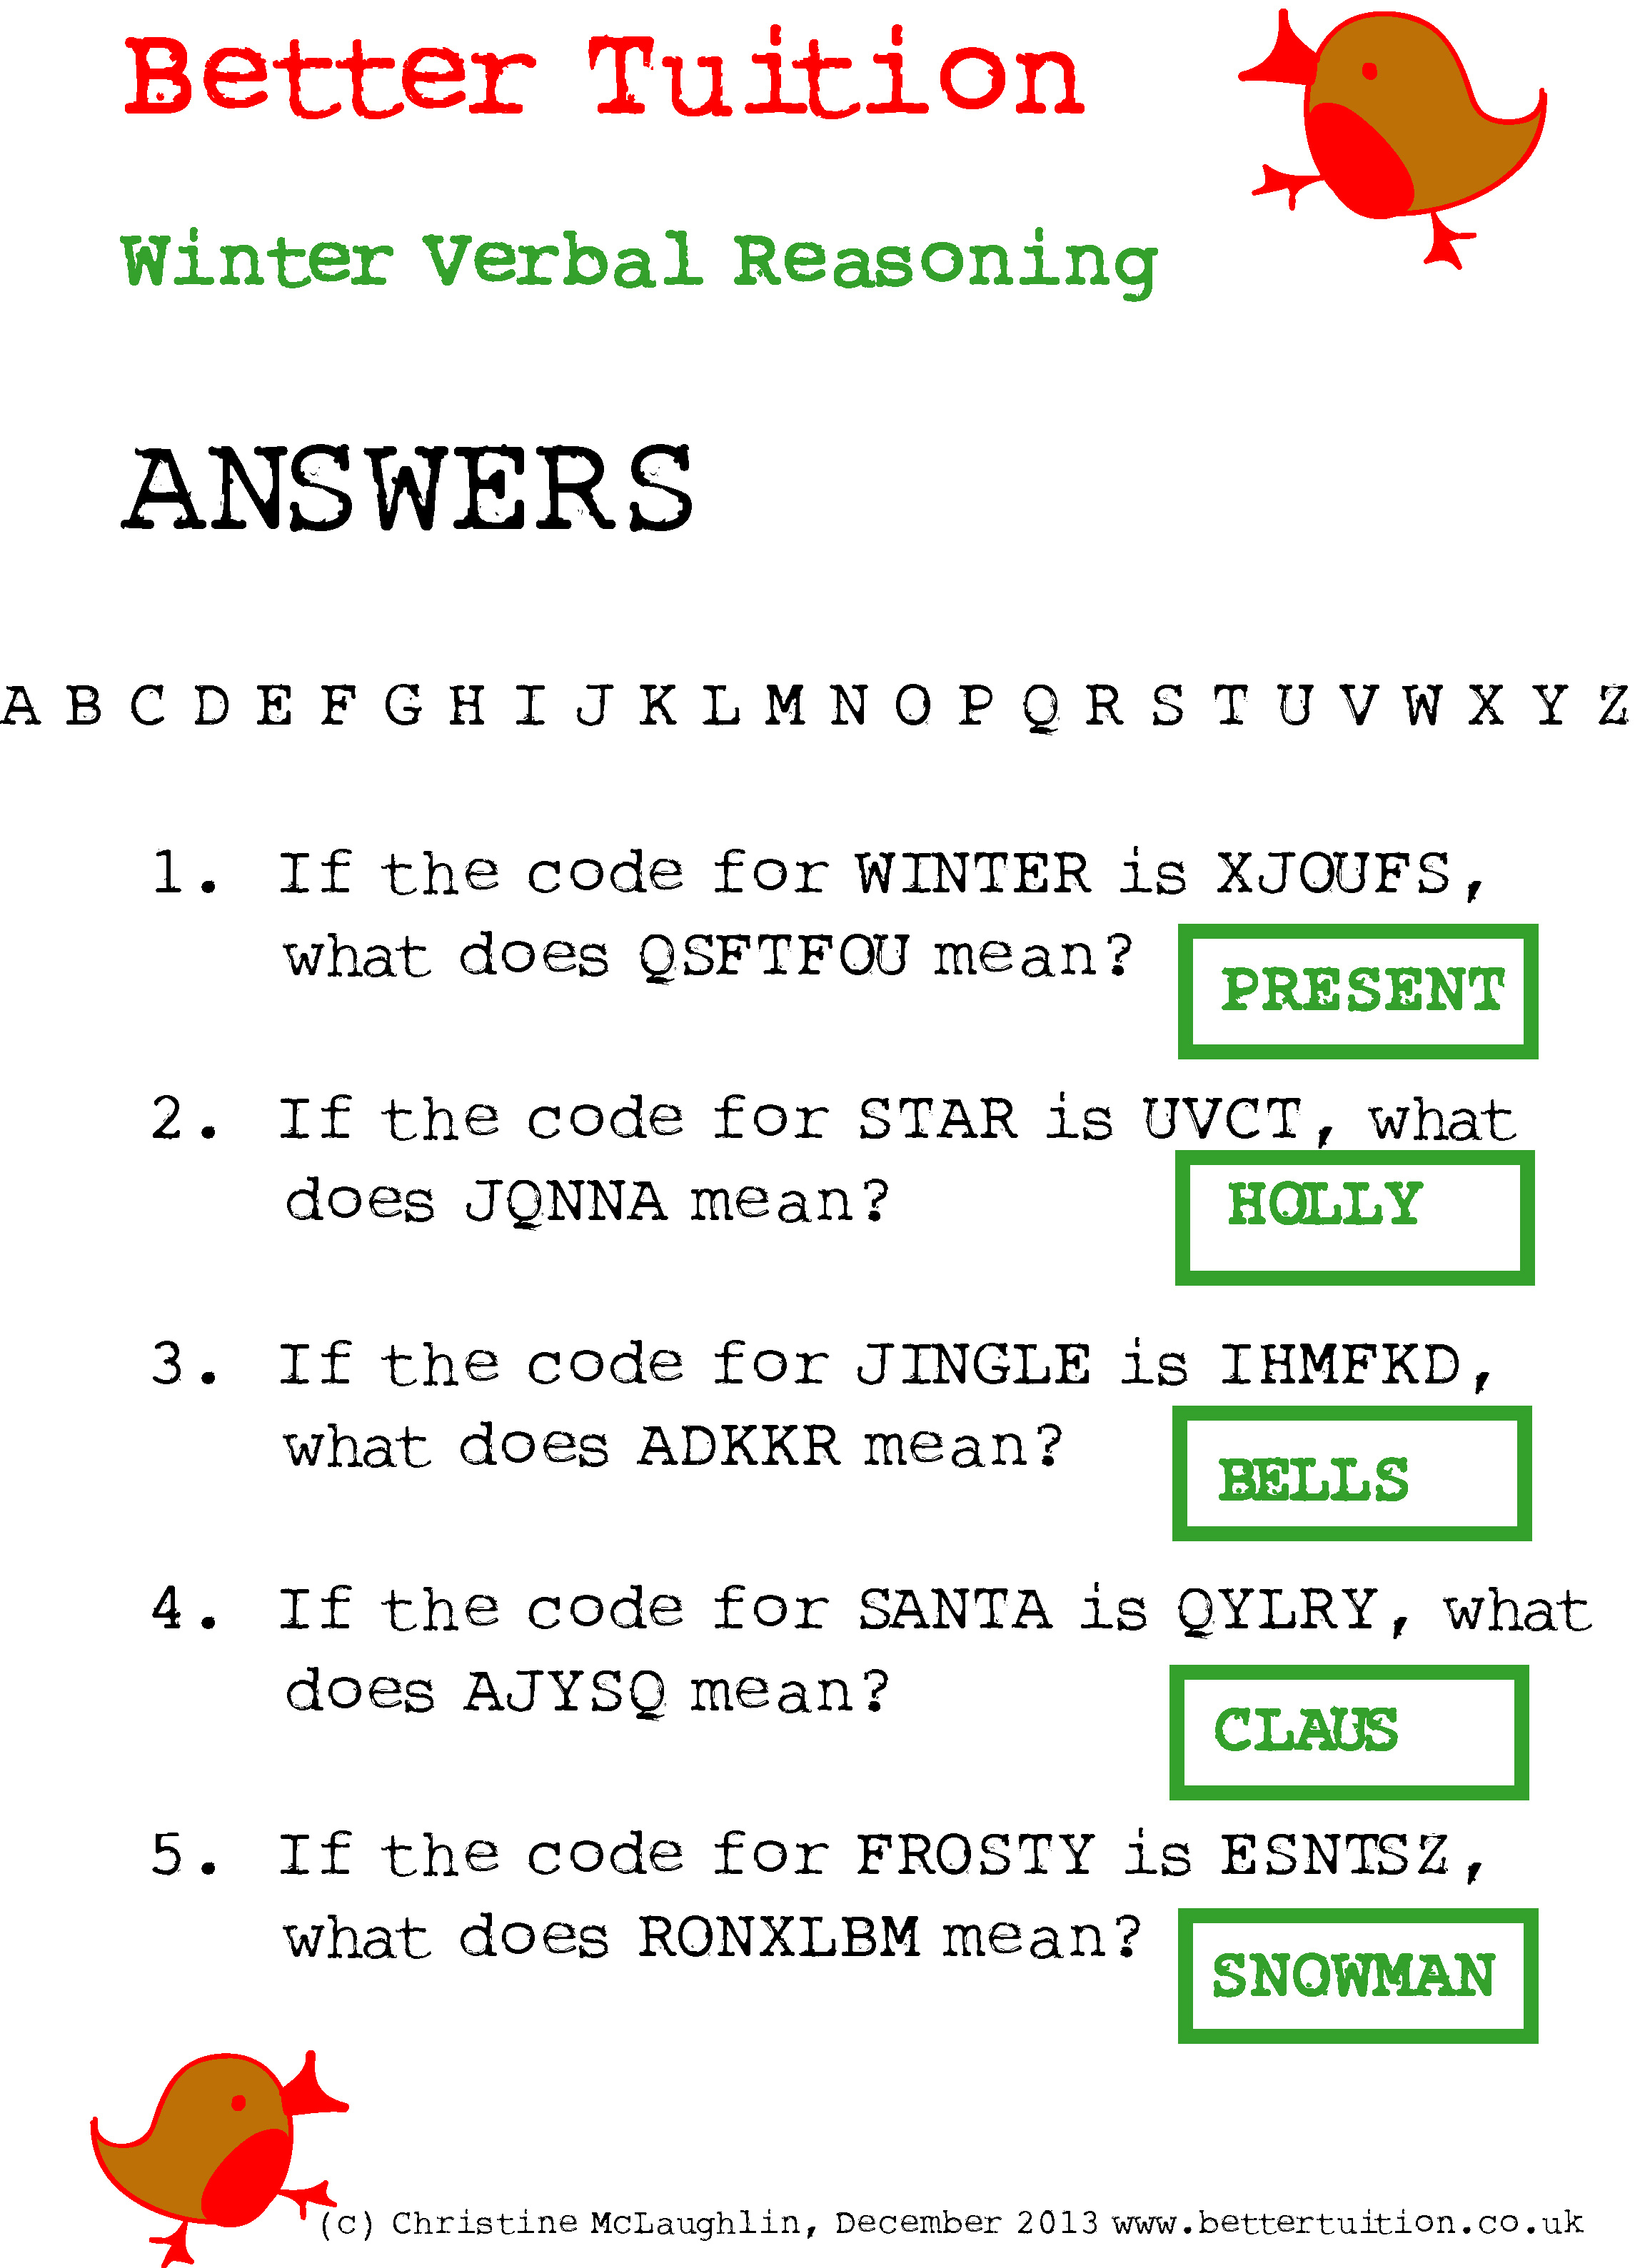 verbal-reasoning-code-cracking-answers-better-tuition